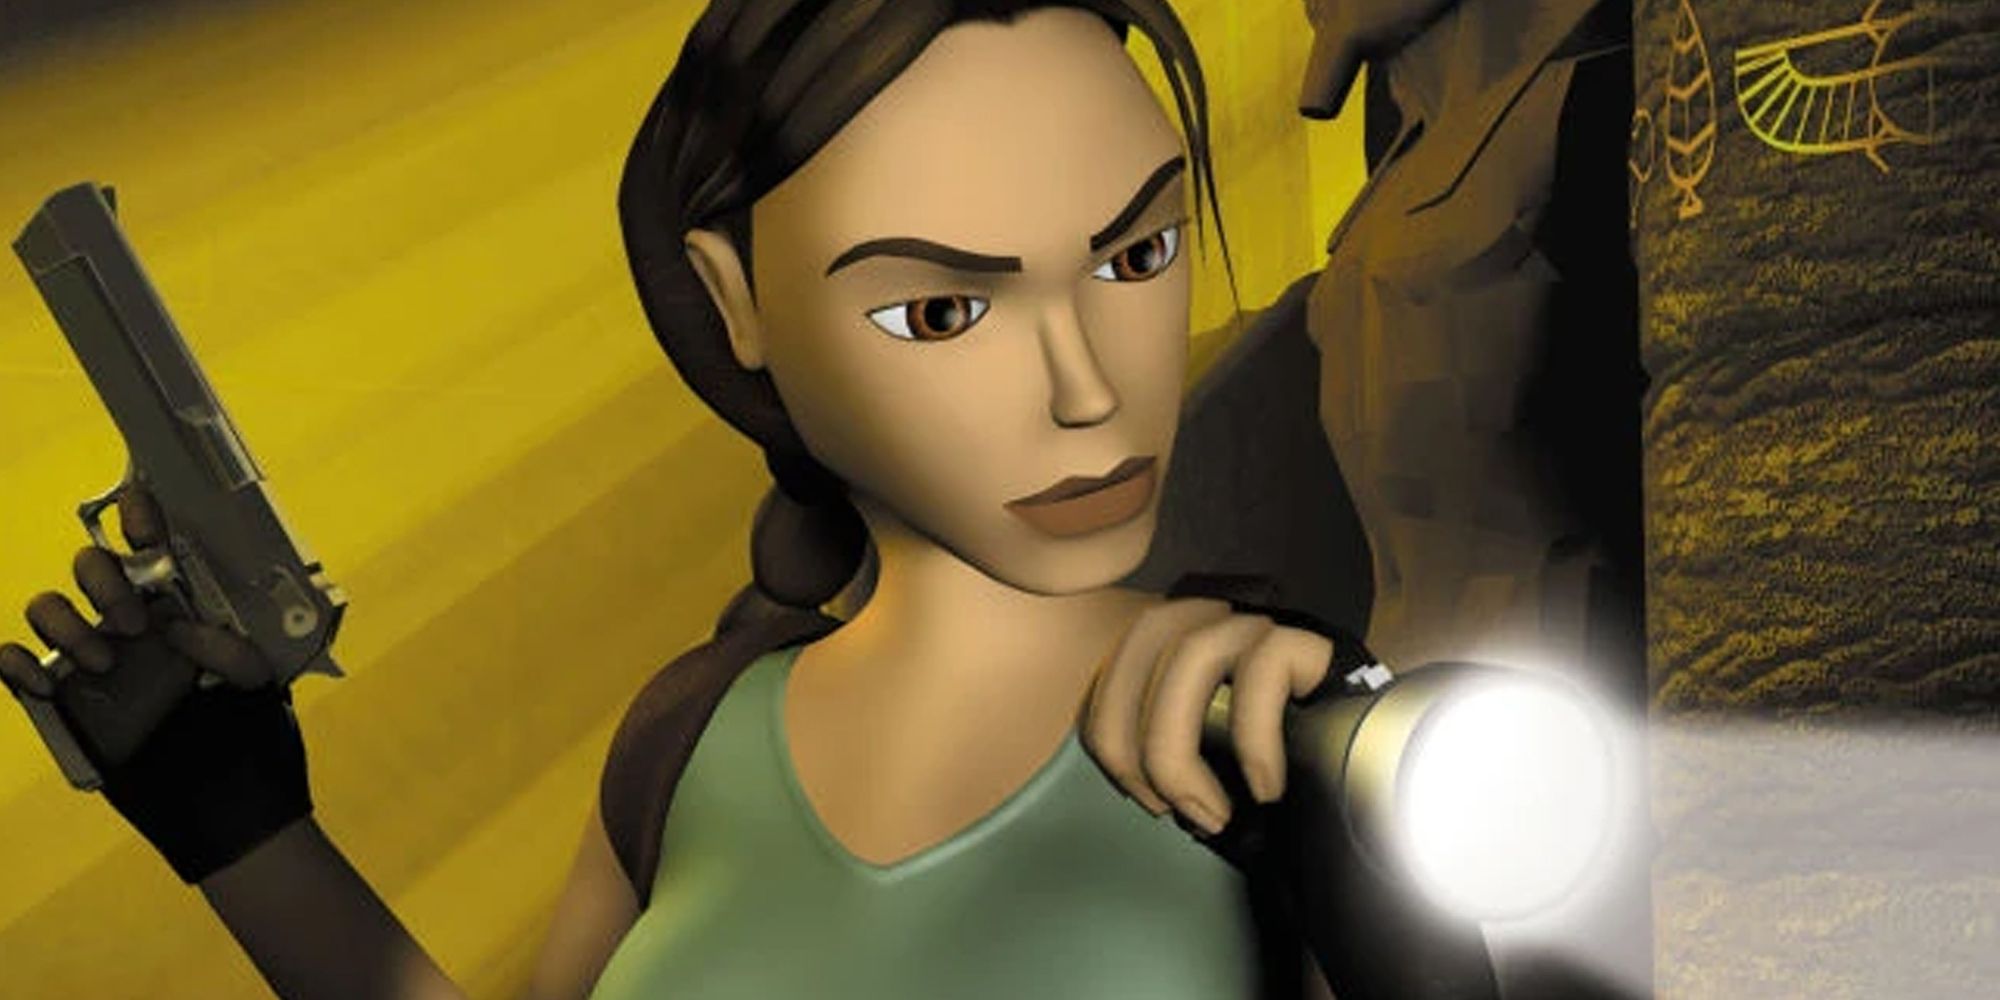 Lara Croft peering around a corner with a pistol and flash light on the cover of Tomb Raider The Last Revelation